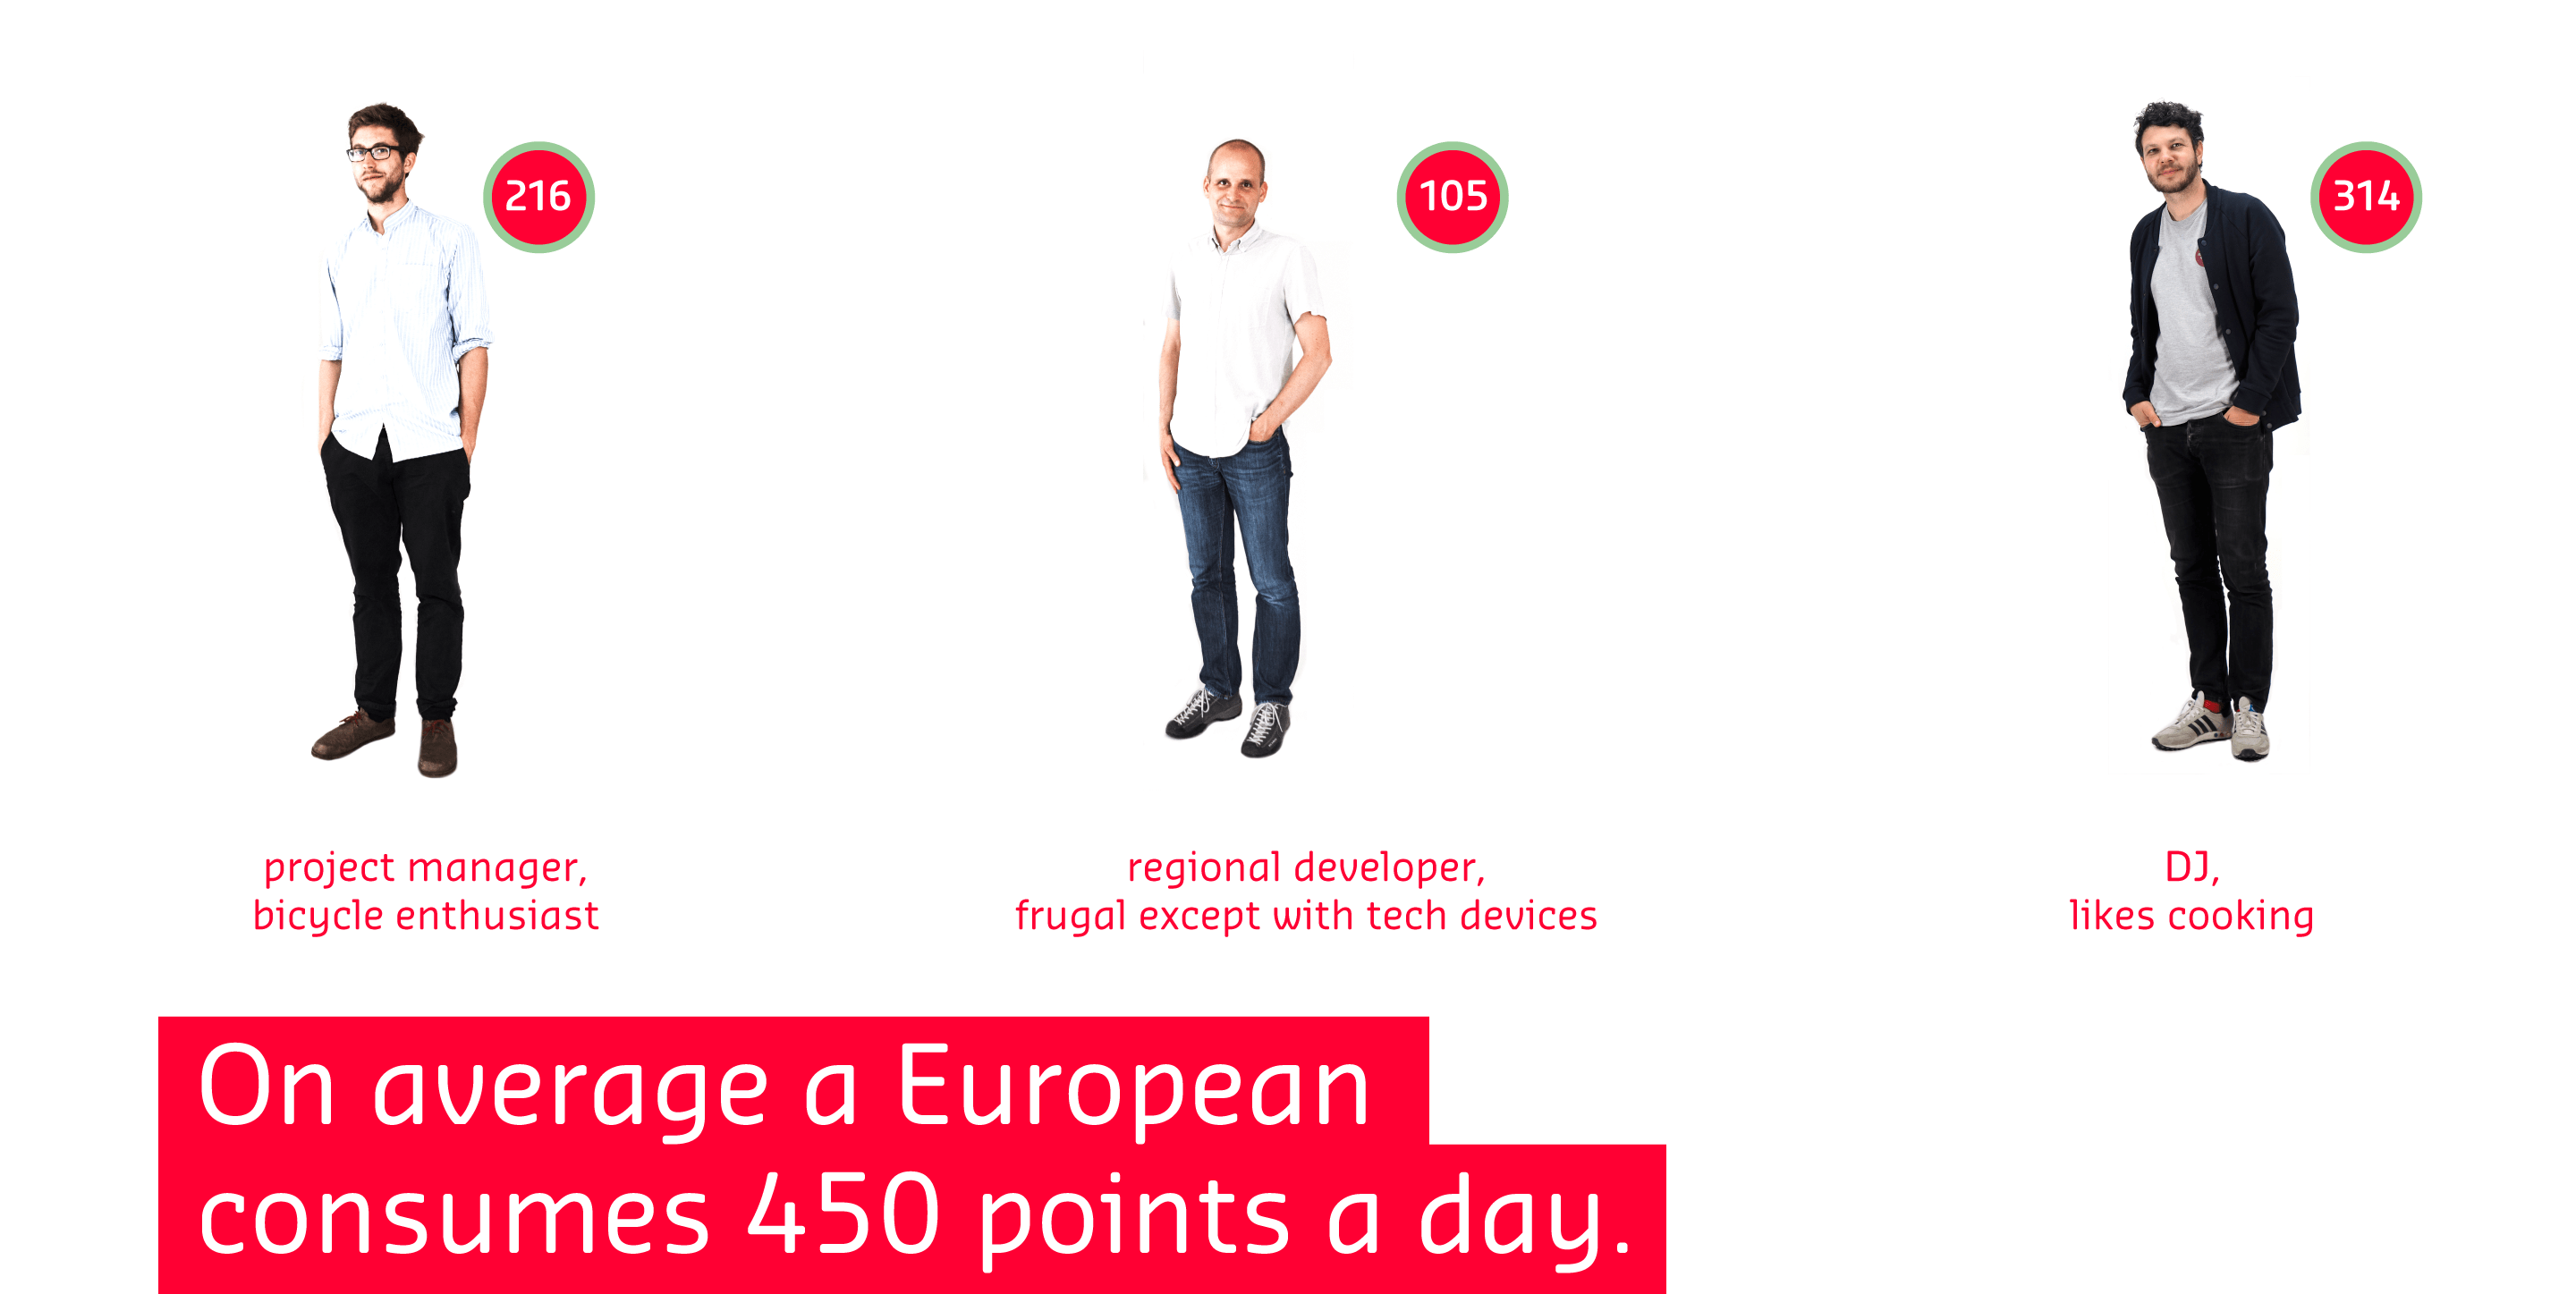 On average a European consumes 450 points a day